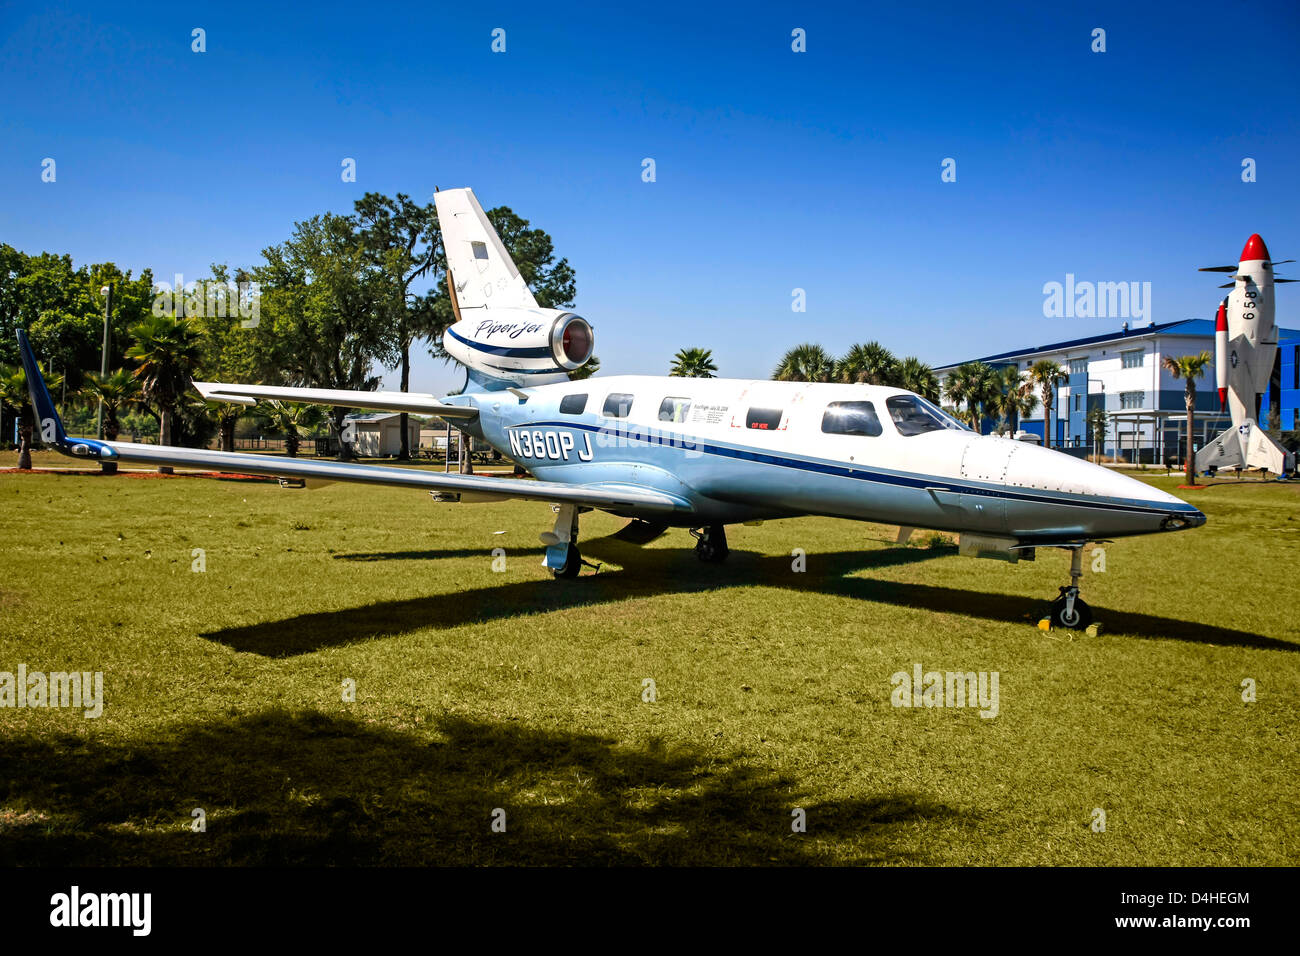 A PiperJet PA-47 plane outside the Sun n Fun Florida Air Museum at Lakeland Stock Photo